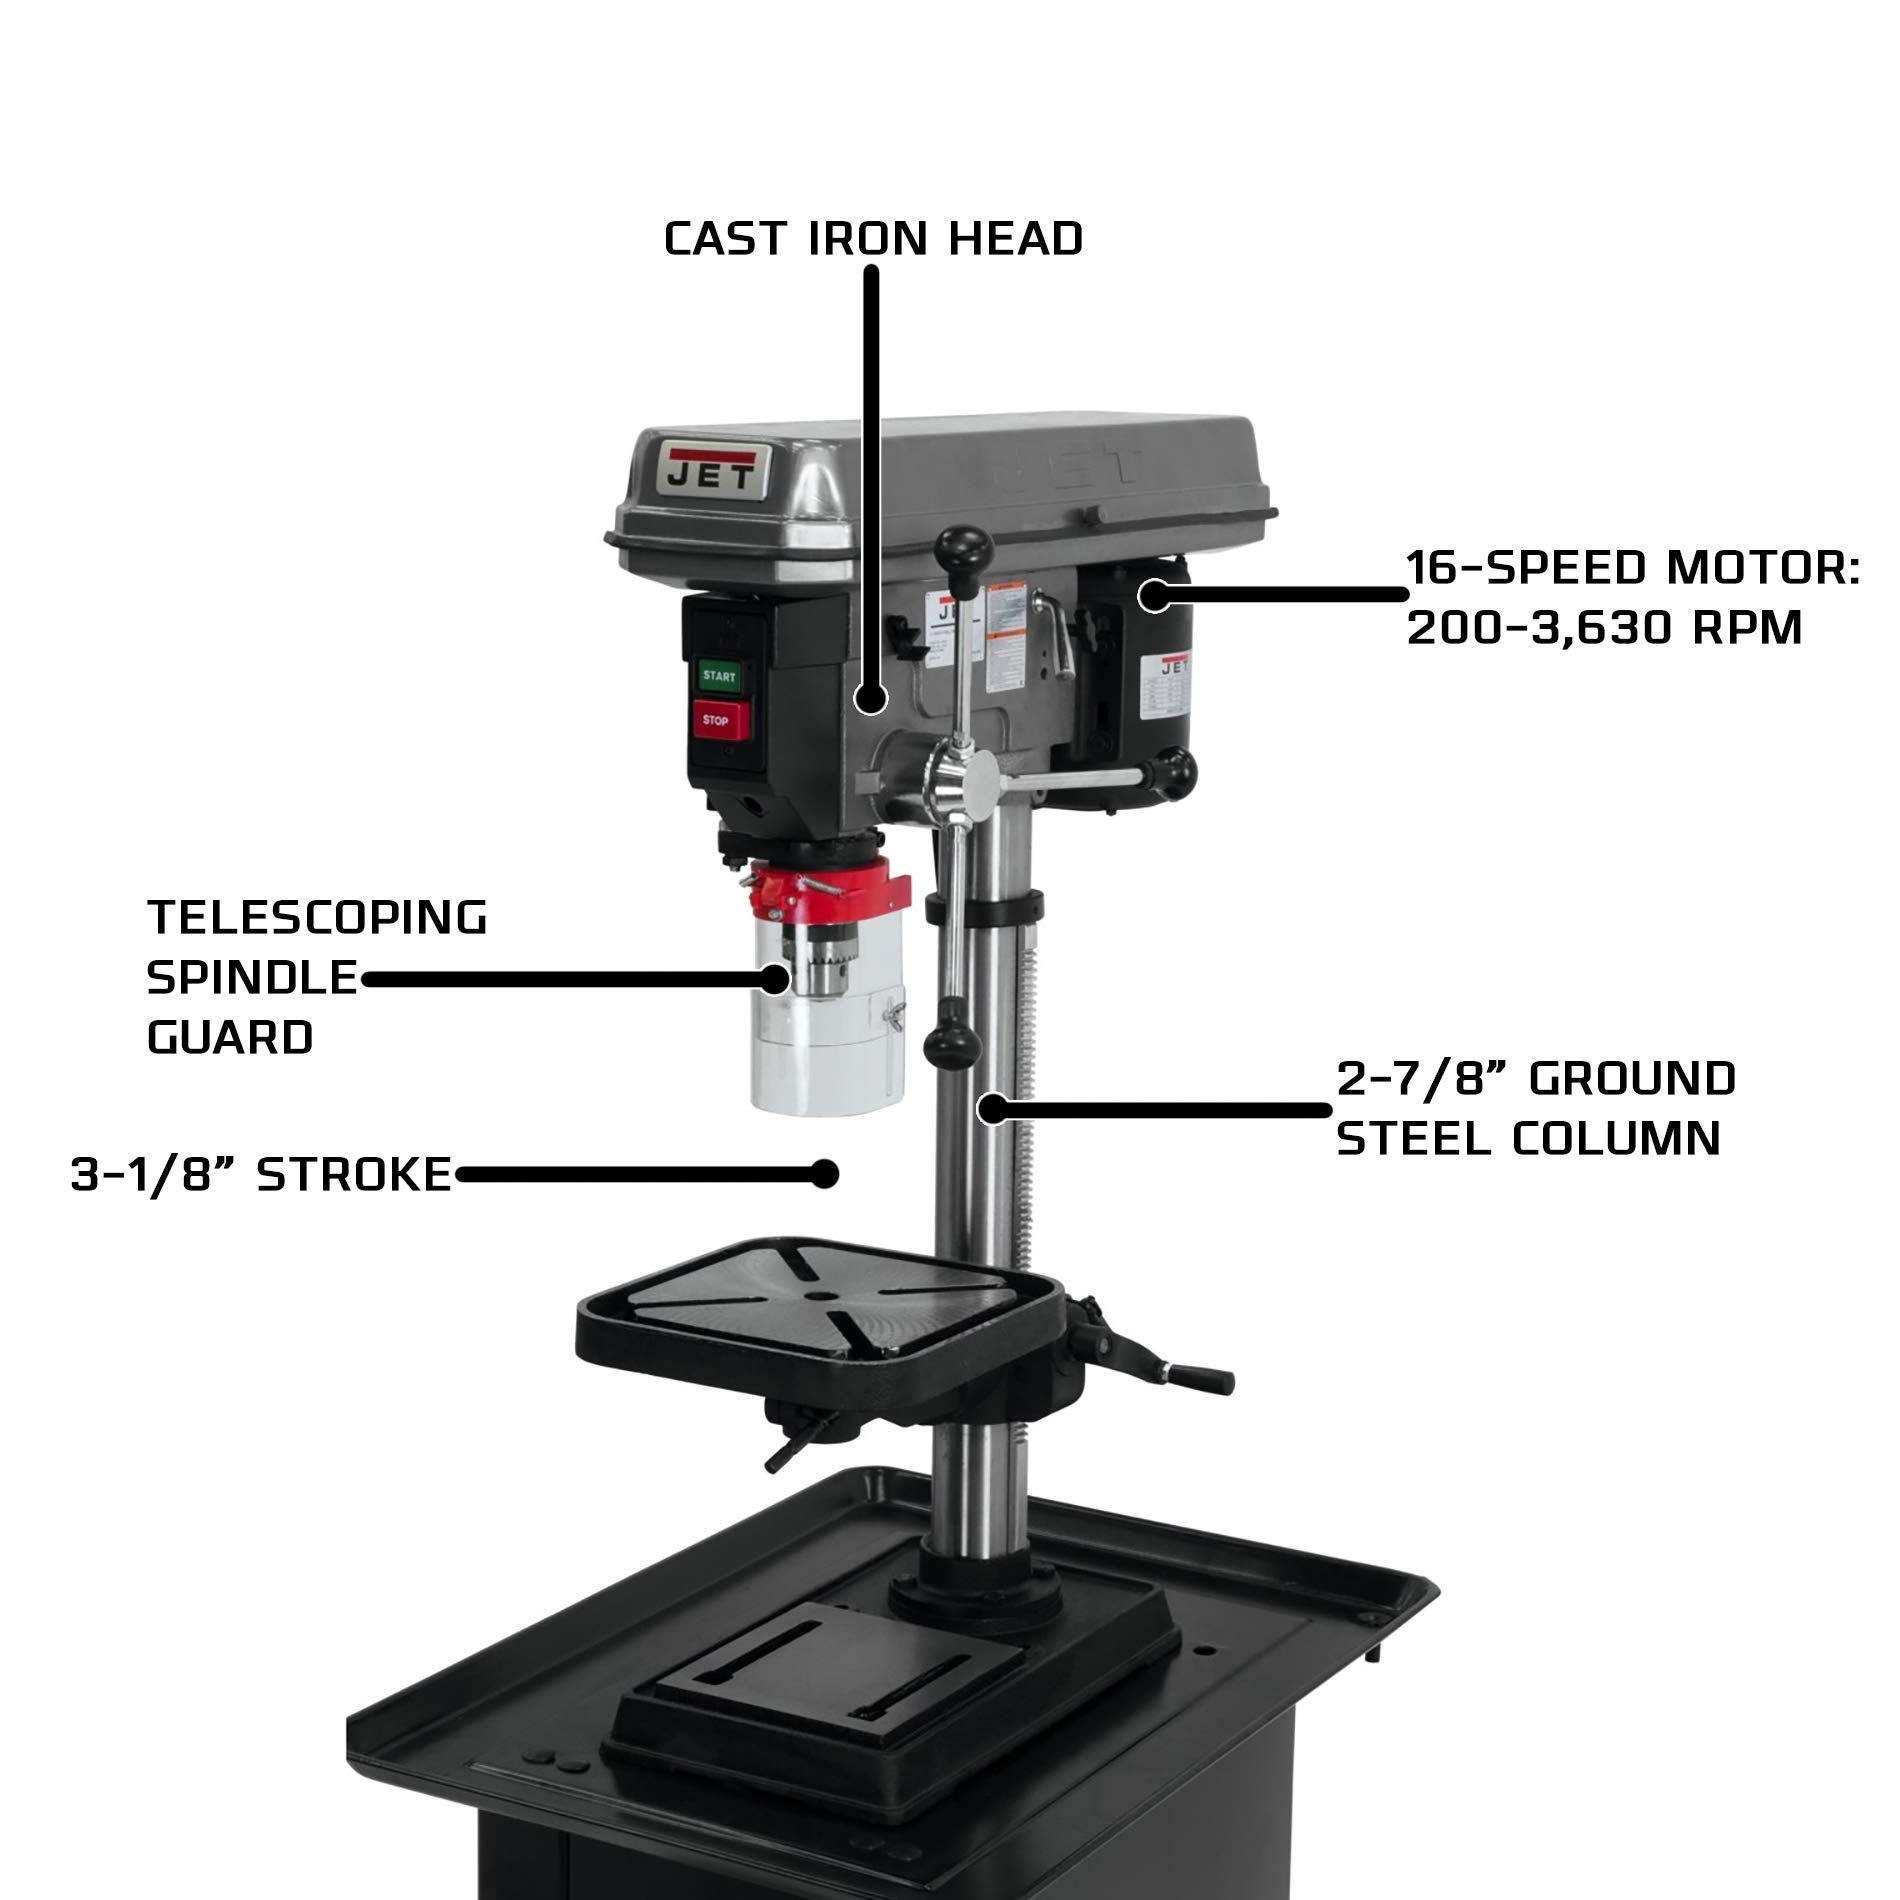 JET J-2530, 15-Inch Benchtop Drill Press, 3/4-HP, 115V 1PH (354401) & Wilton LP4 Low Profile Drill Press Vise, 4" Jaw Width, 4" Jaw Opening (11744)